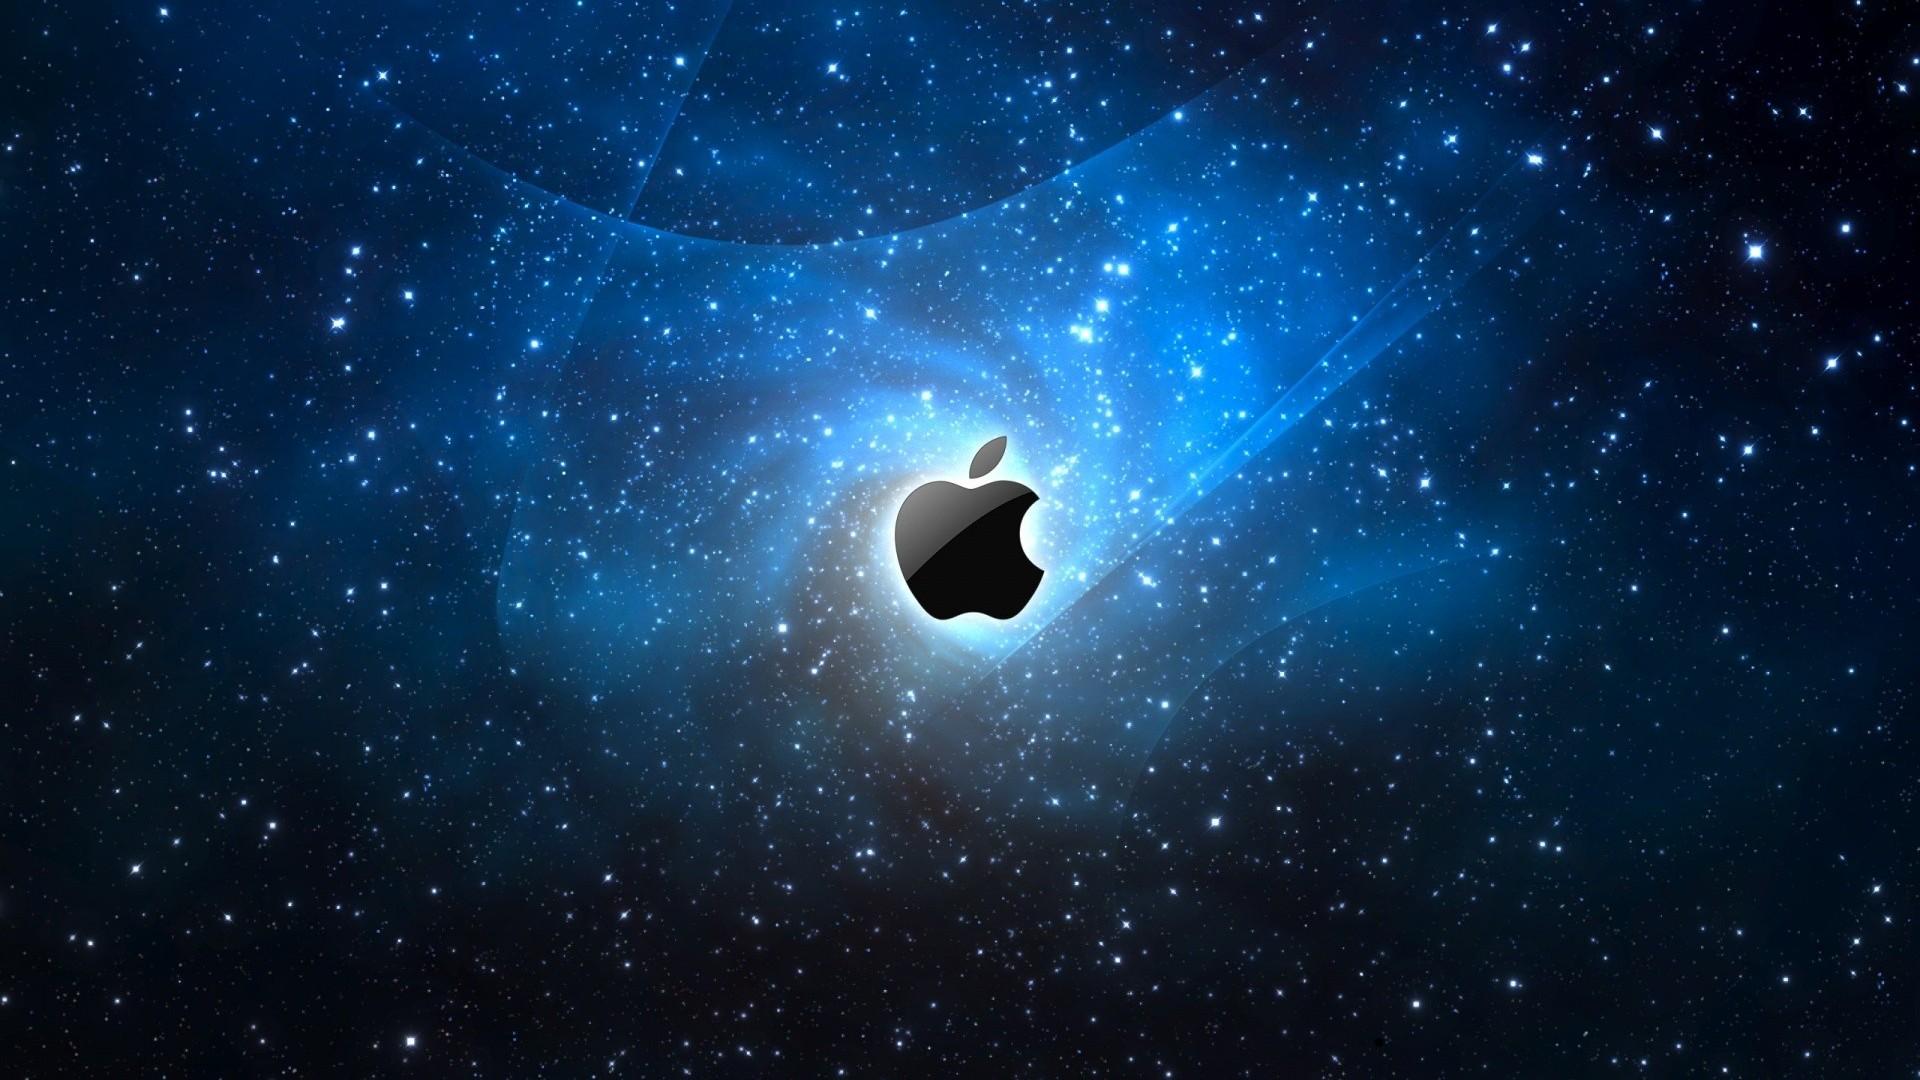 Wallpapers For Dark Blue Space Background | HD Wallpapers Range